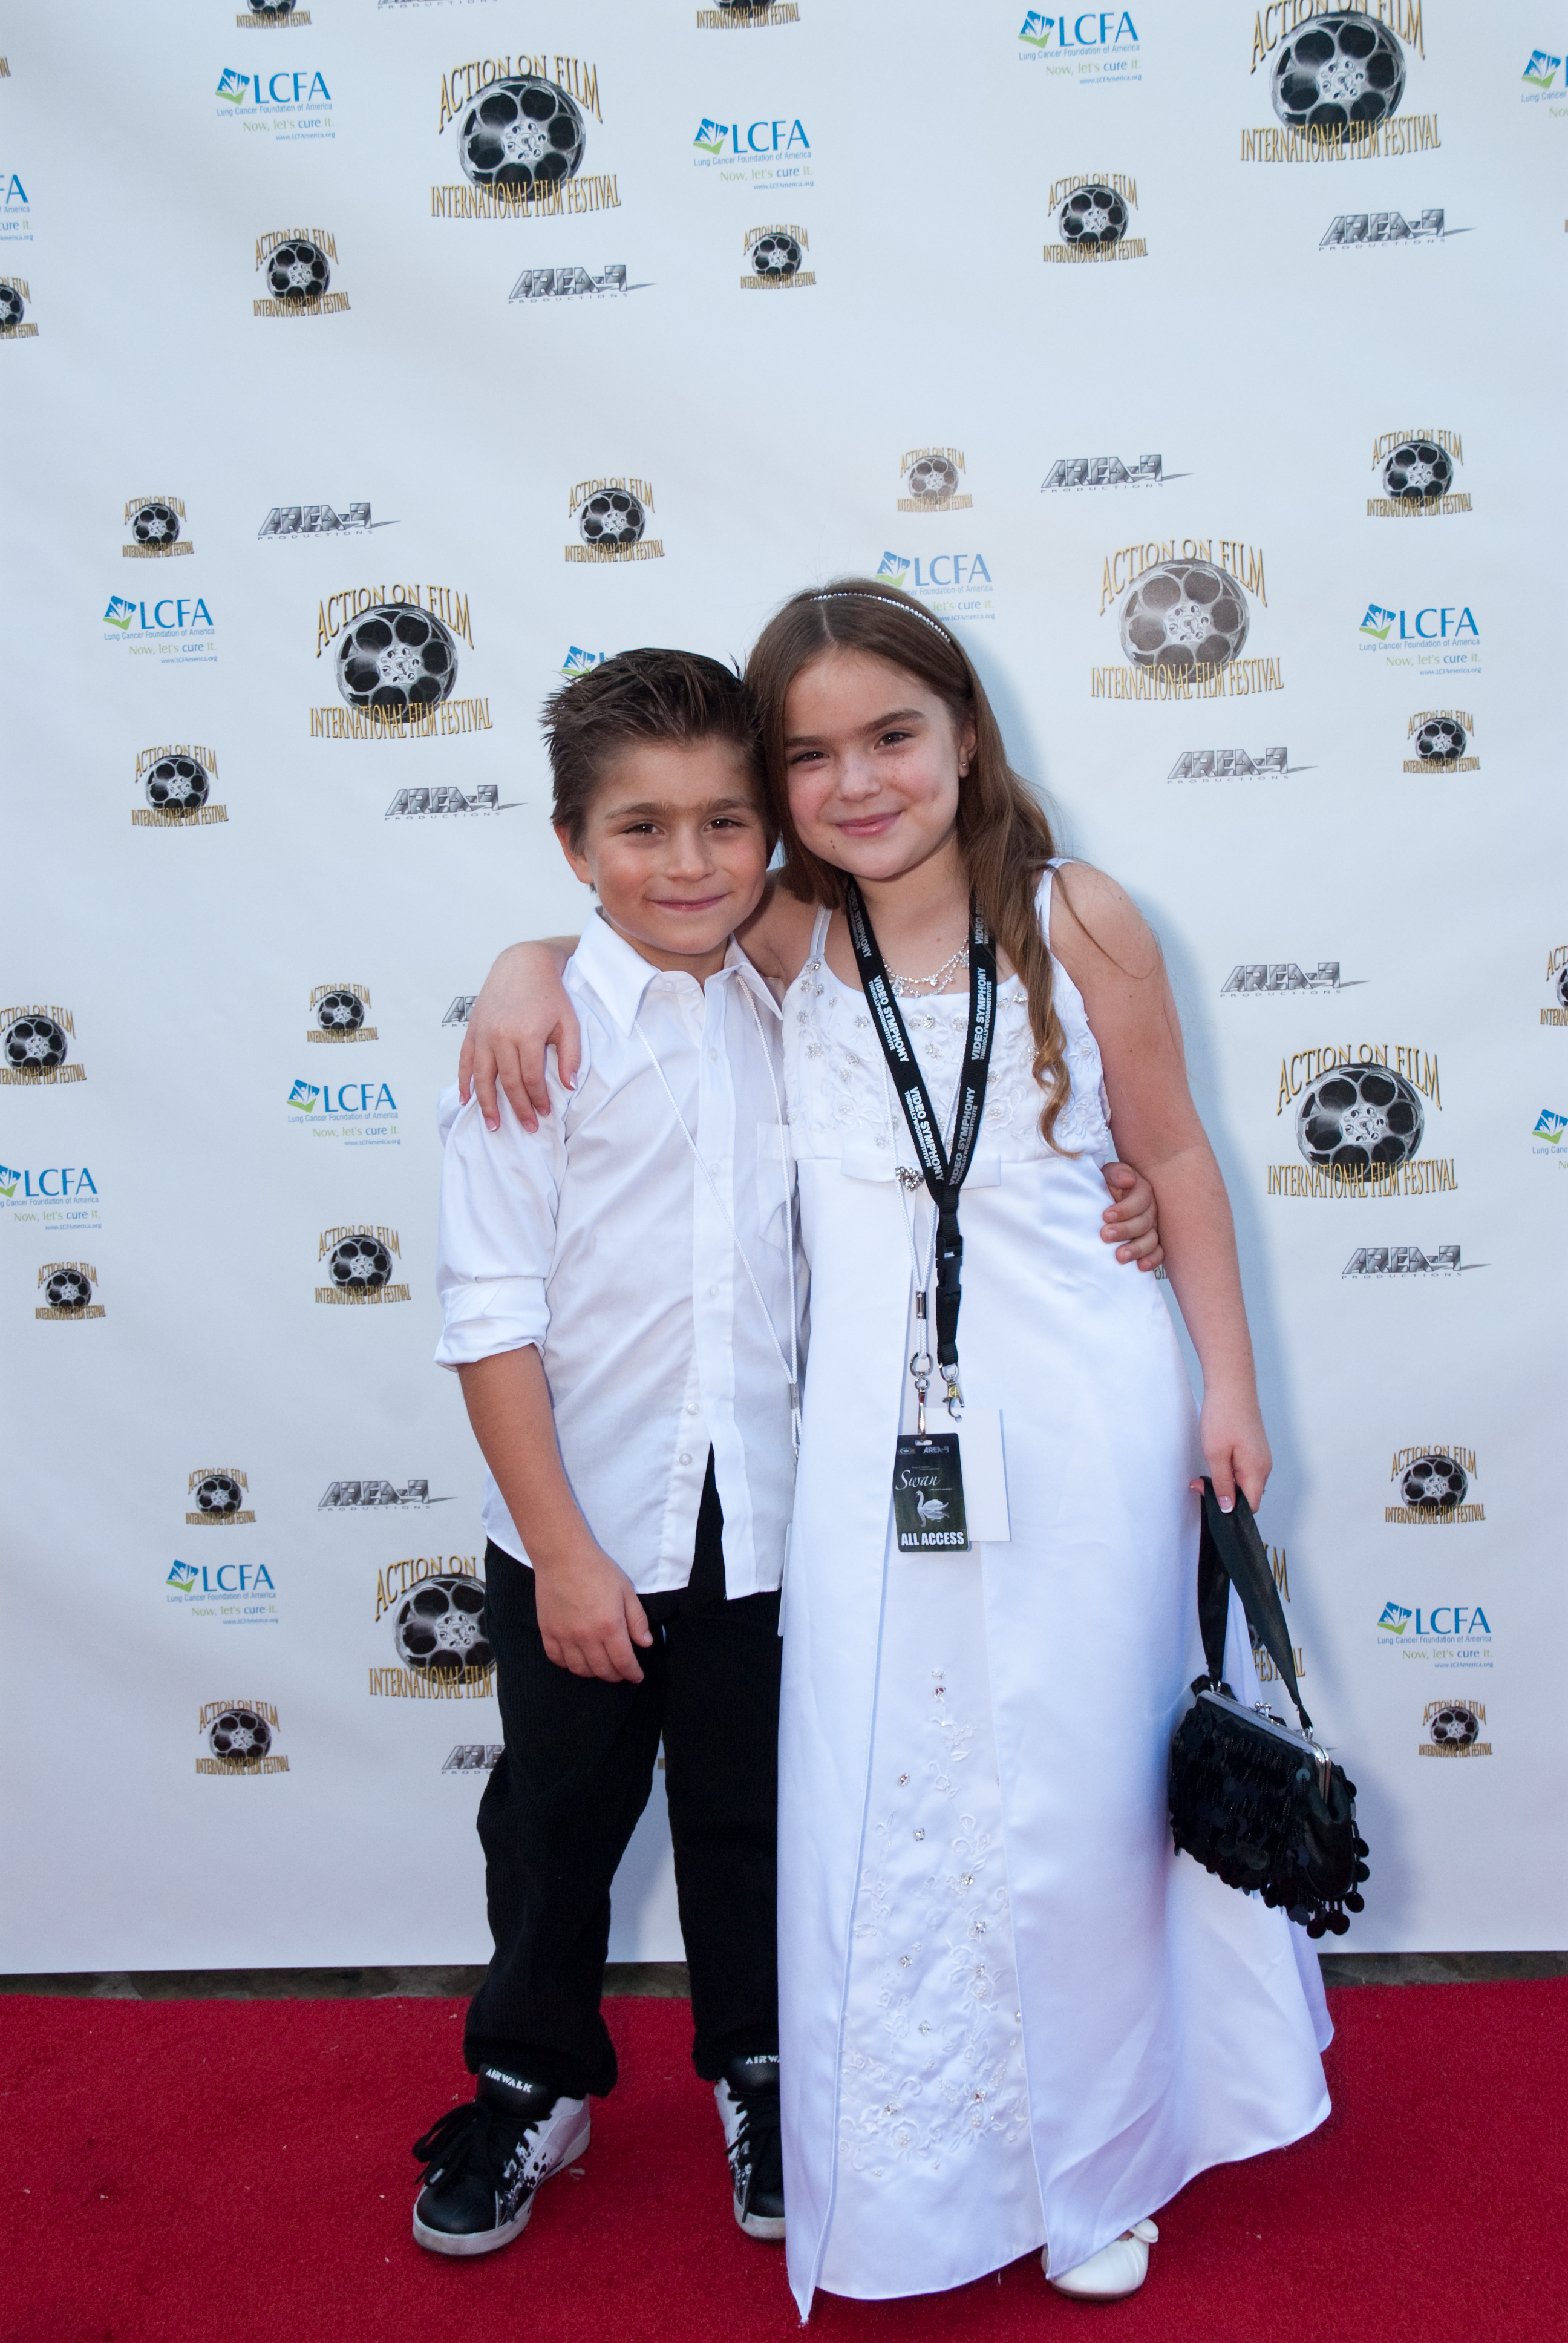 HannaH Eisenmann & Stone Eisenmann on the Red Carpet For the Lung Cancer Foundation of America Charity event / Premiere of their SWAN ..ONE MAN'S JOURNEY starring with the cast of Criminal Minds